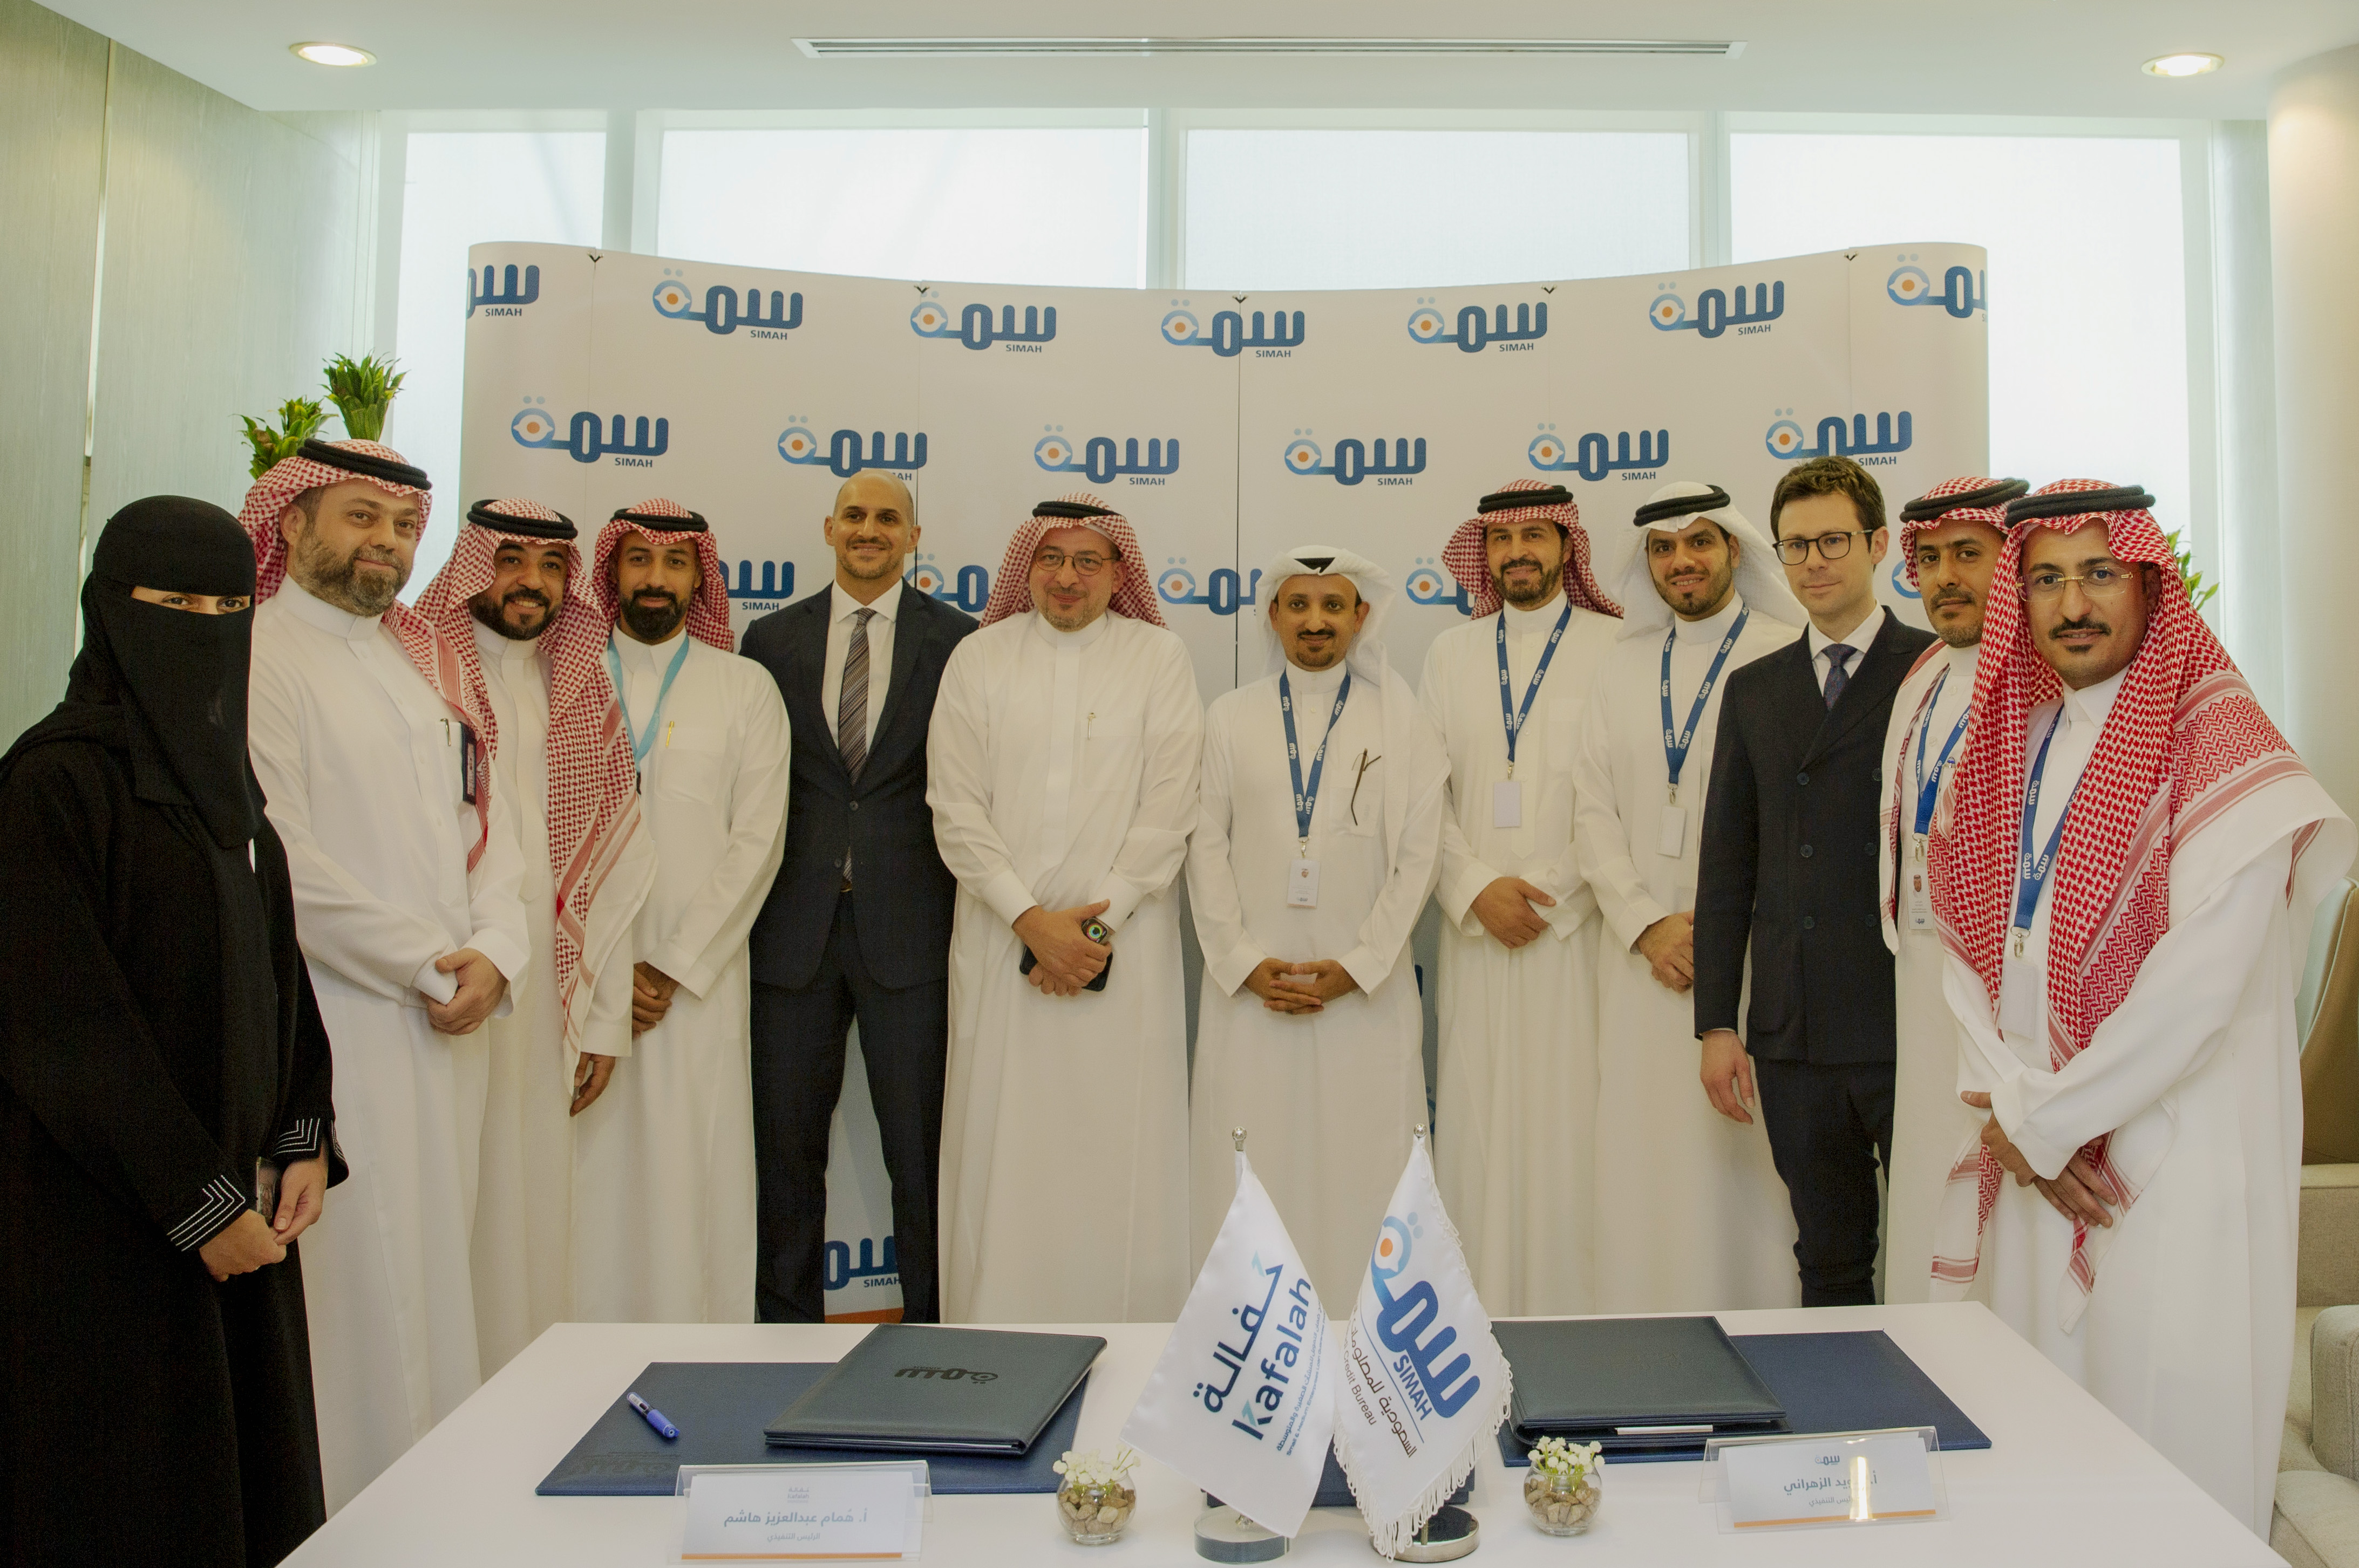  Qarar joins SIMAH and Modefinance in a value-added services agreement with Kafalah 